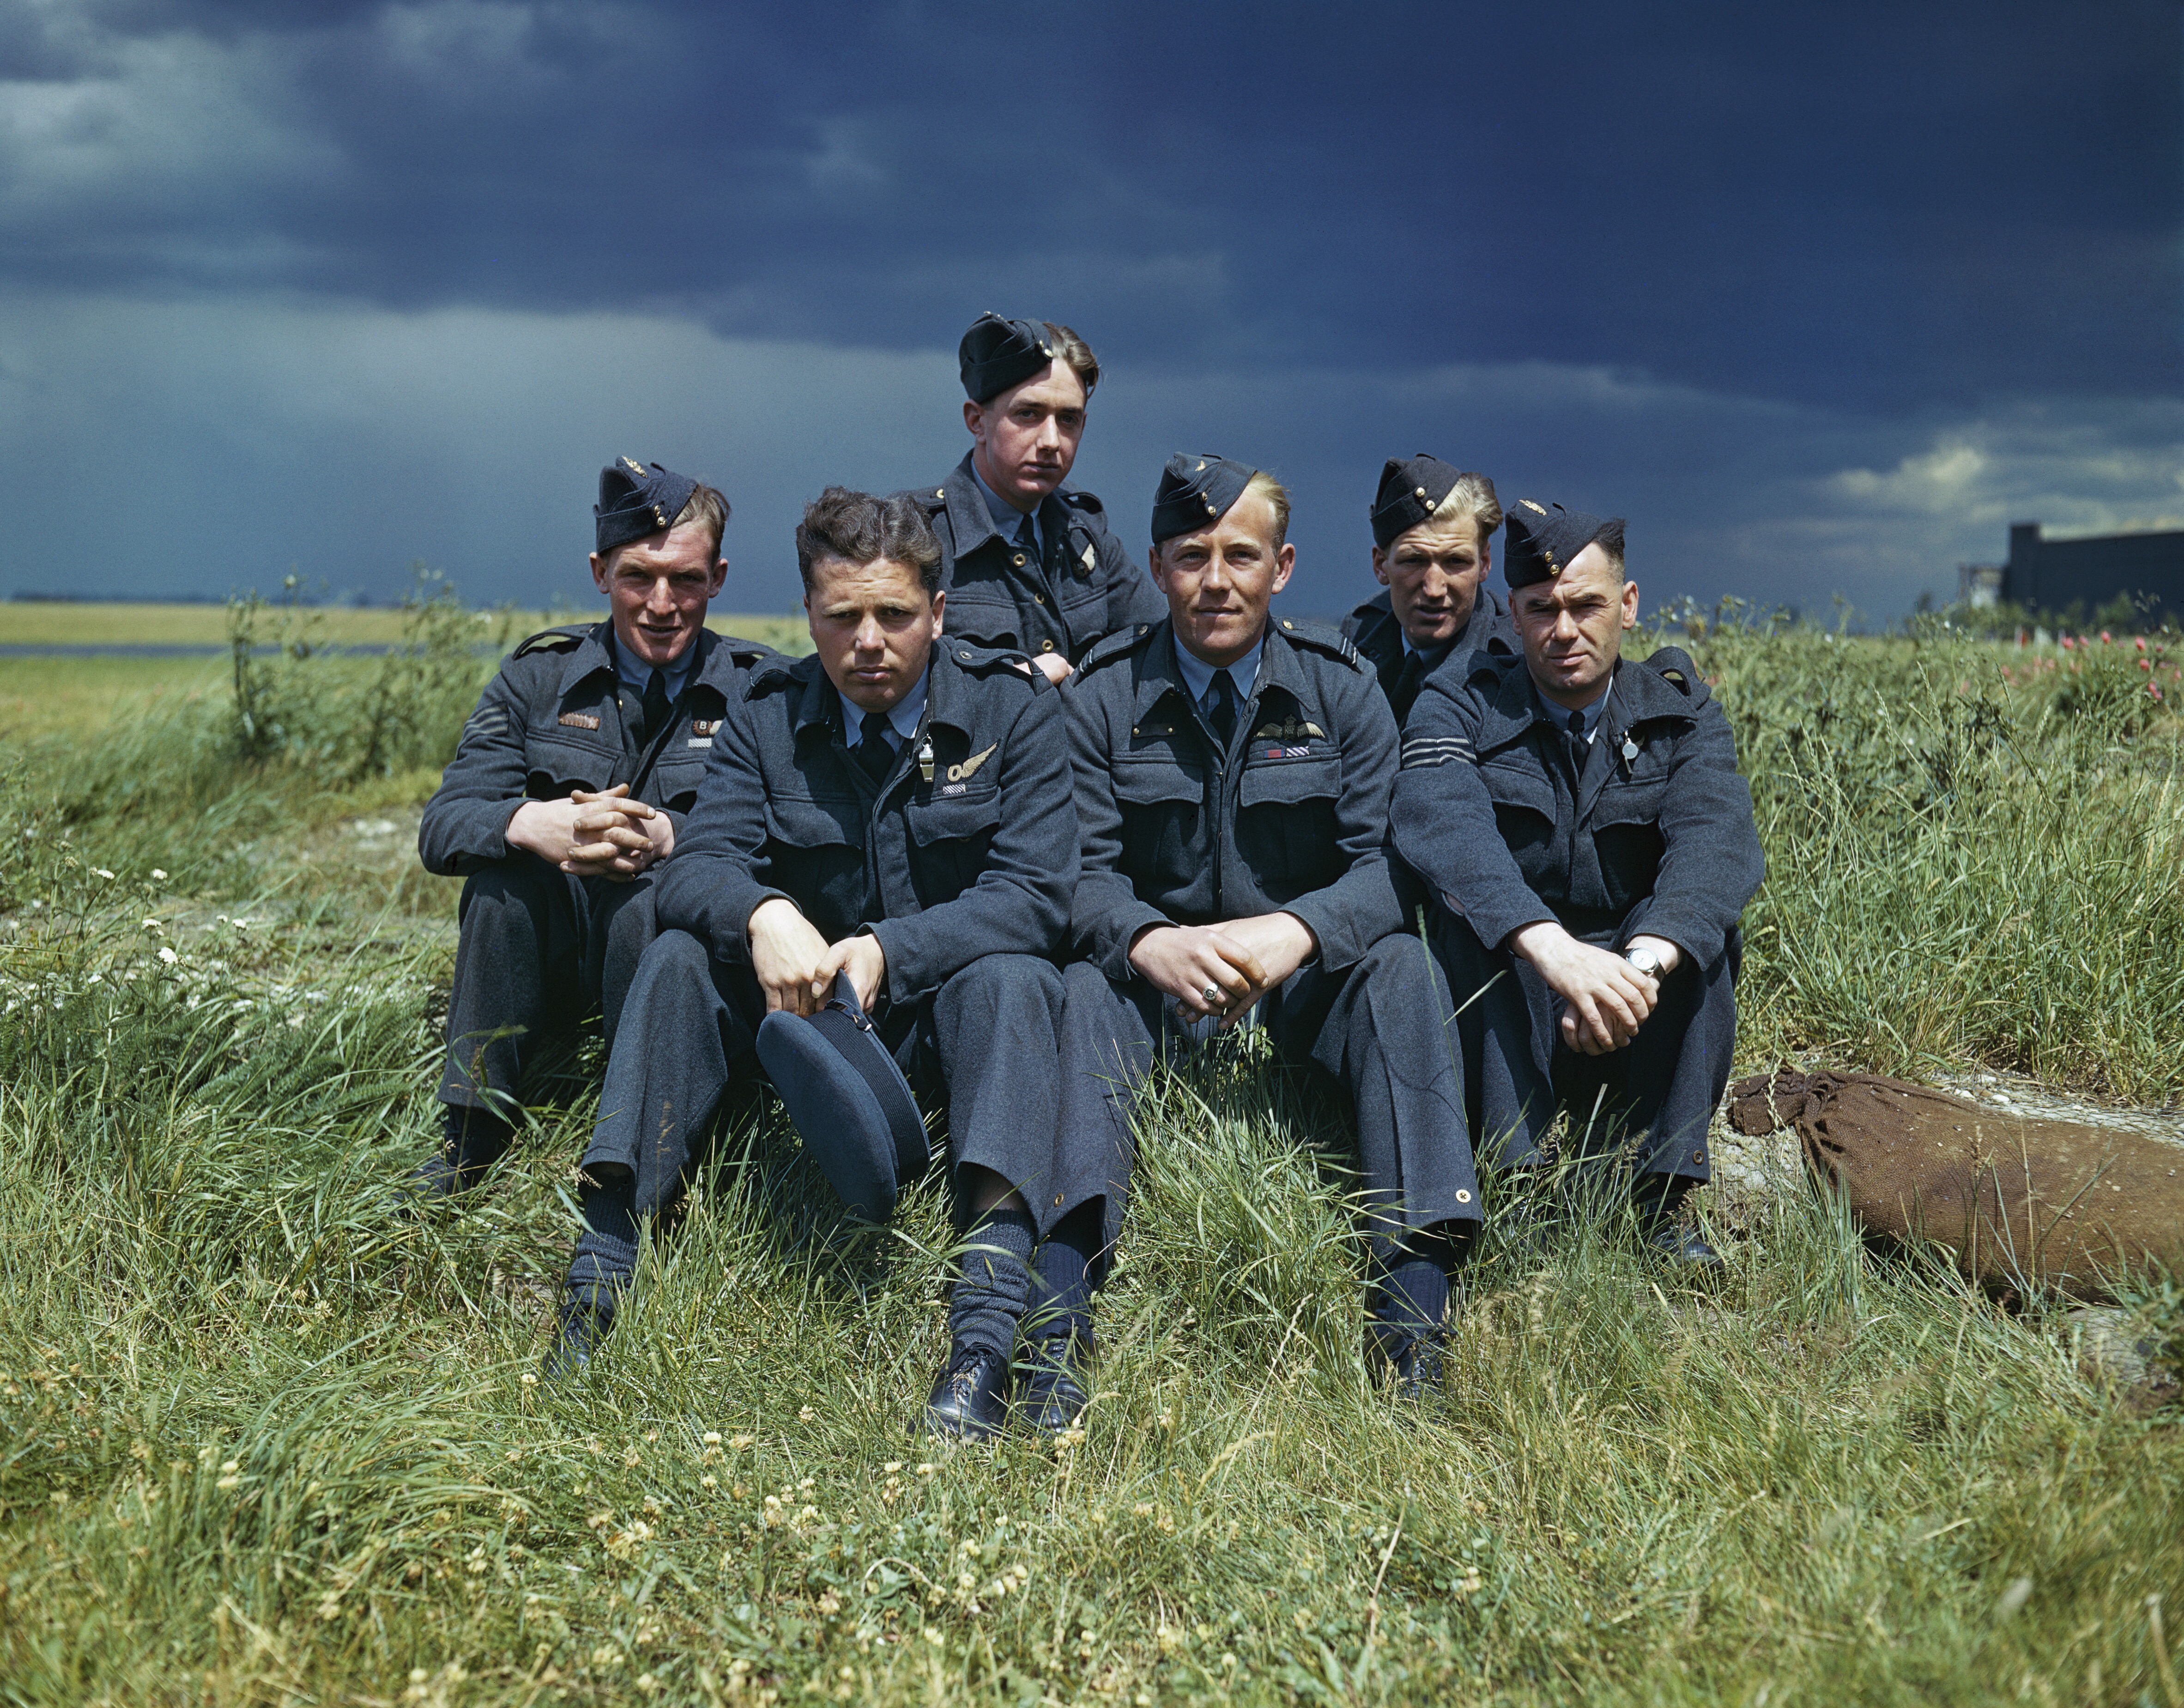 Image shows aged picture of RAF aviators sitting in field for Squadron photo.